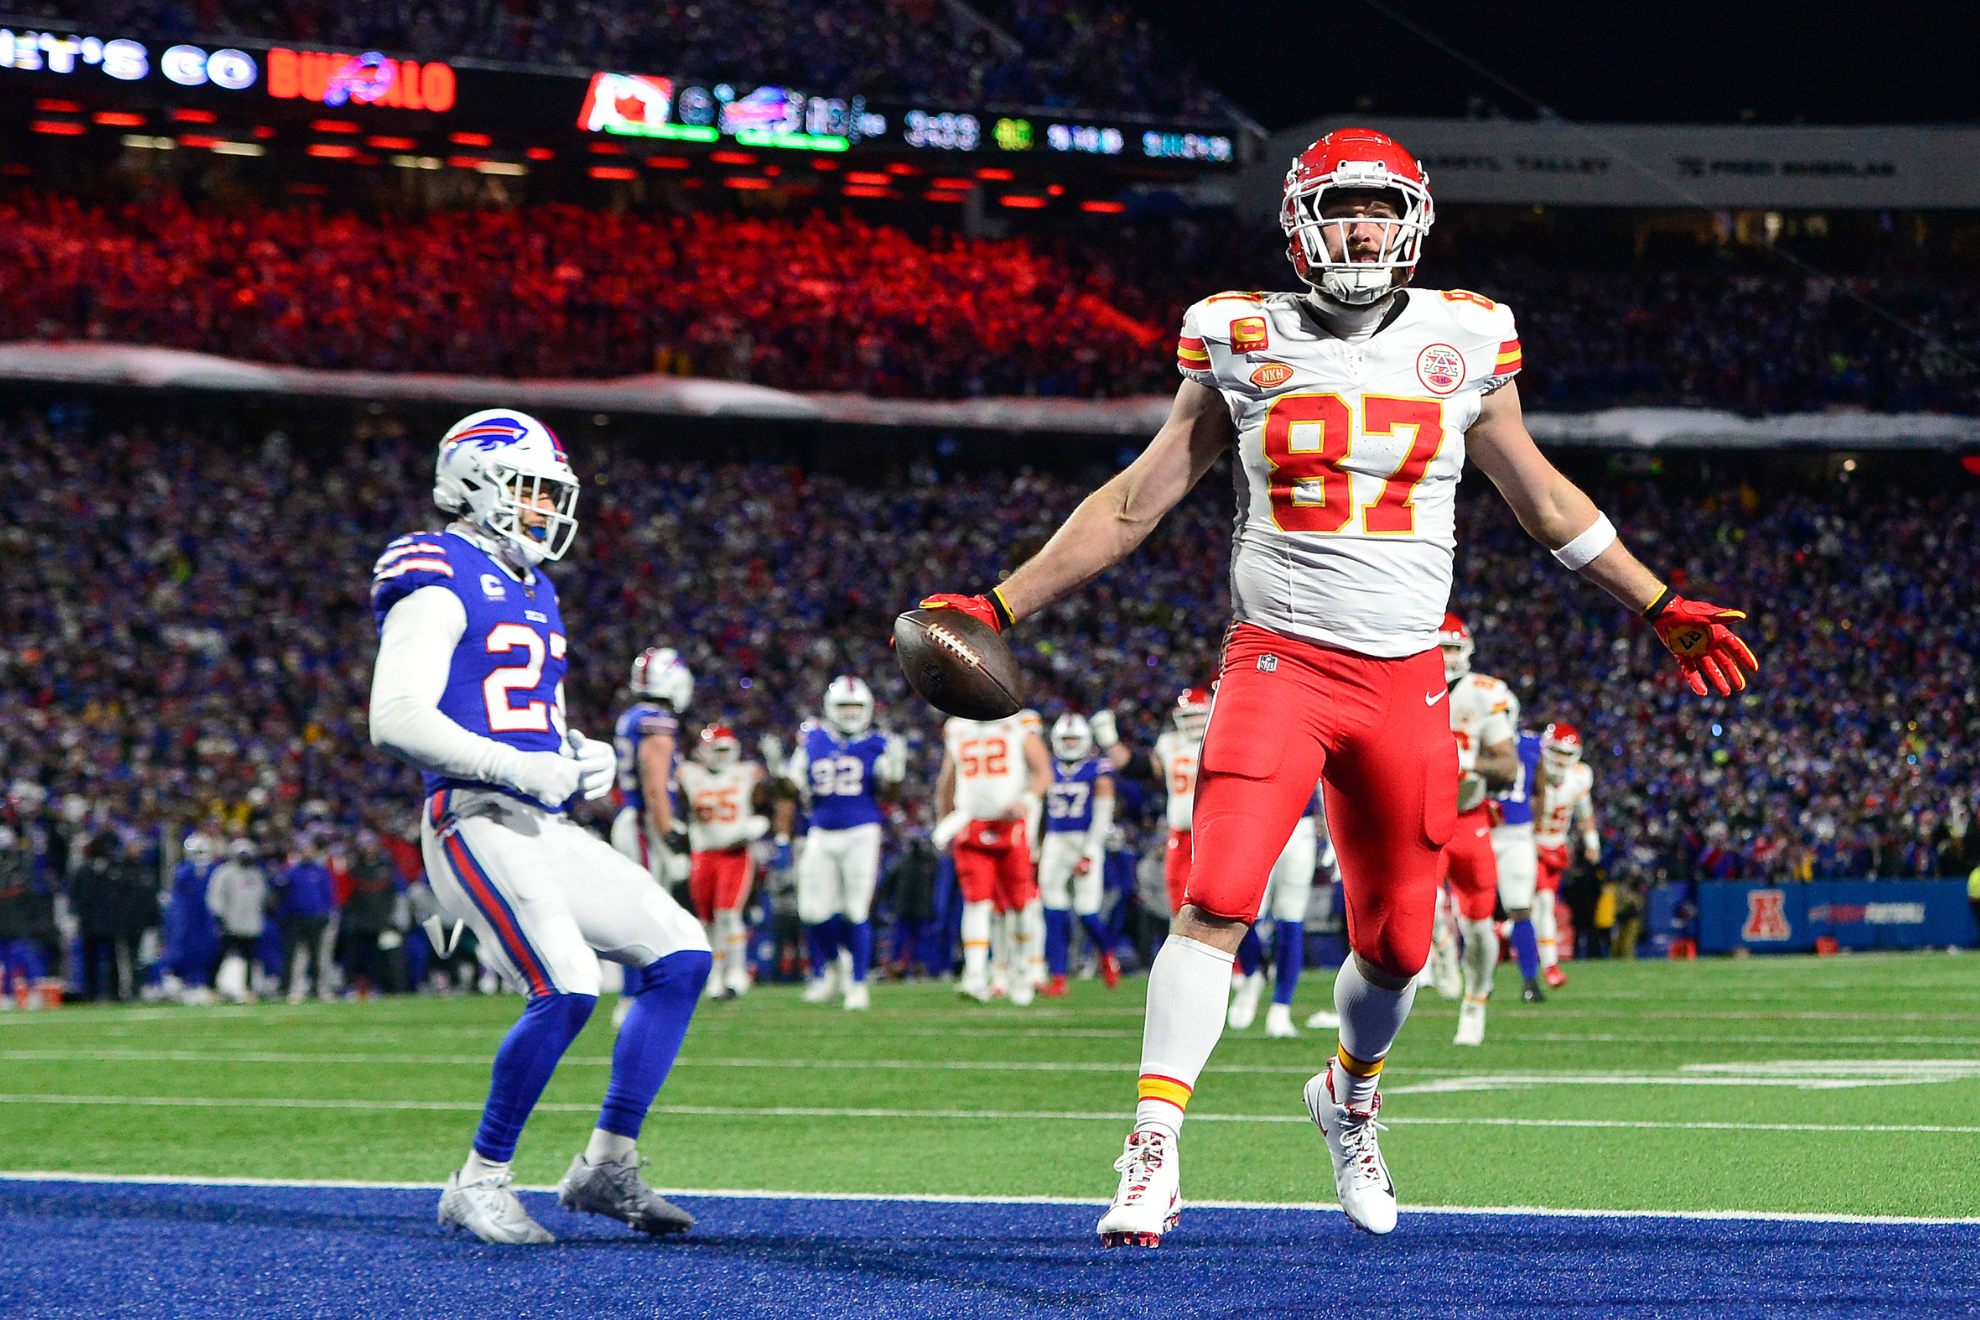 Kelce celebrates the record-tying touchdown in the second quarter.